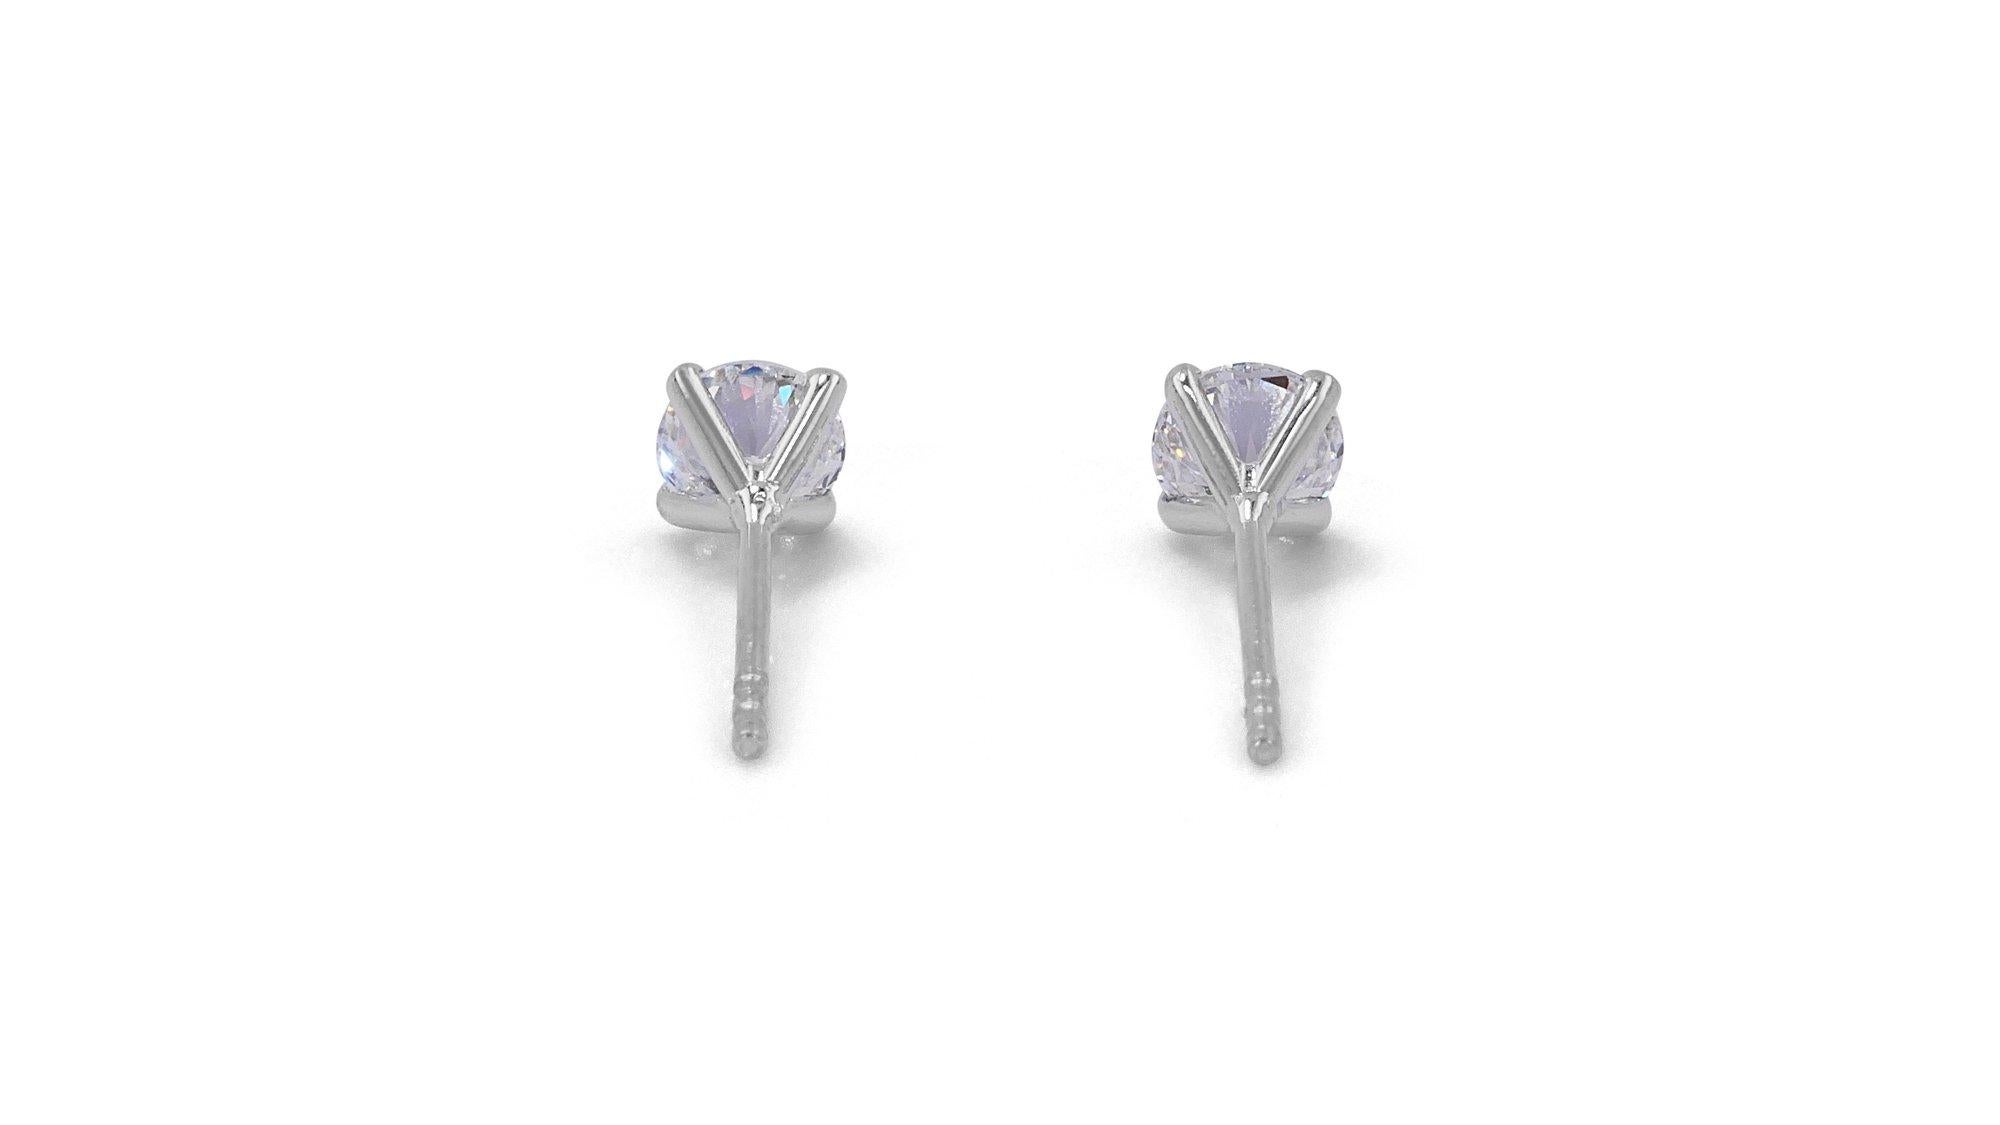 Stunning 18k White Gold Stud Earrings with 0.80 Ct Natural Diamonds GIA Cert For Sale 5